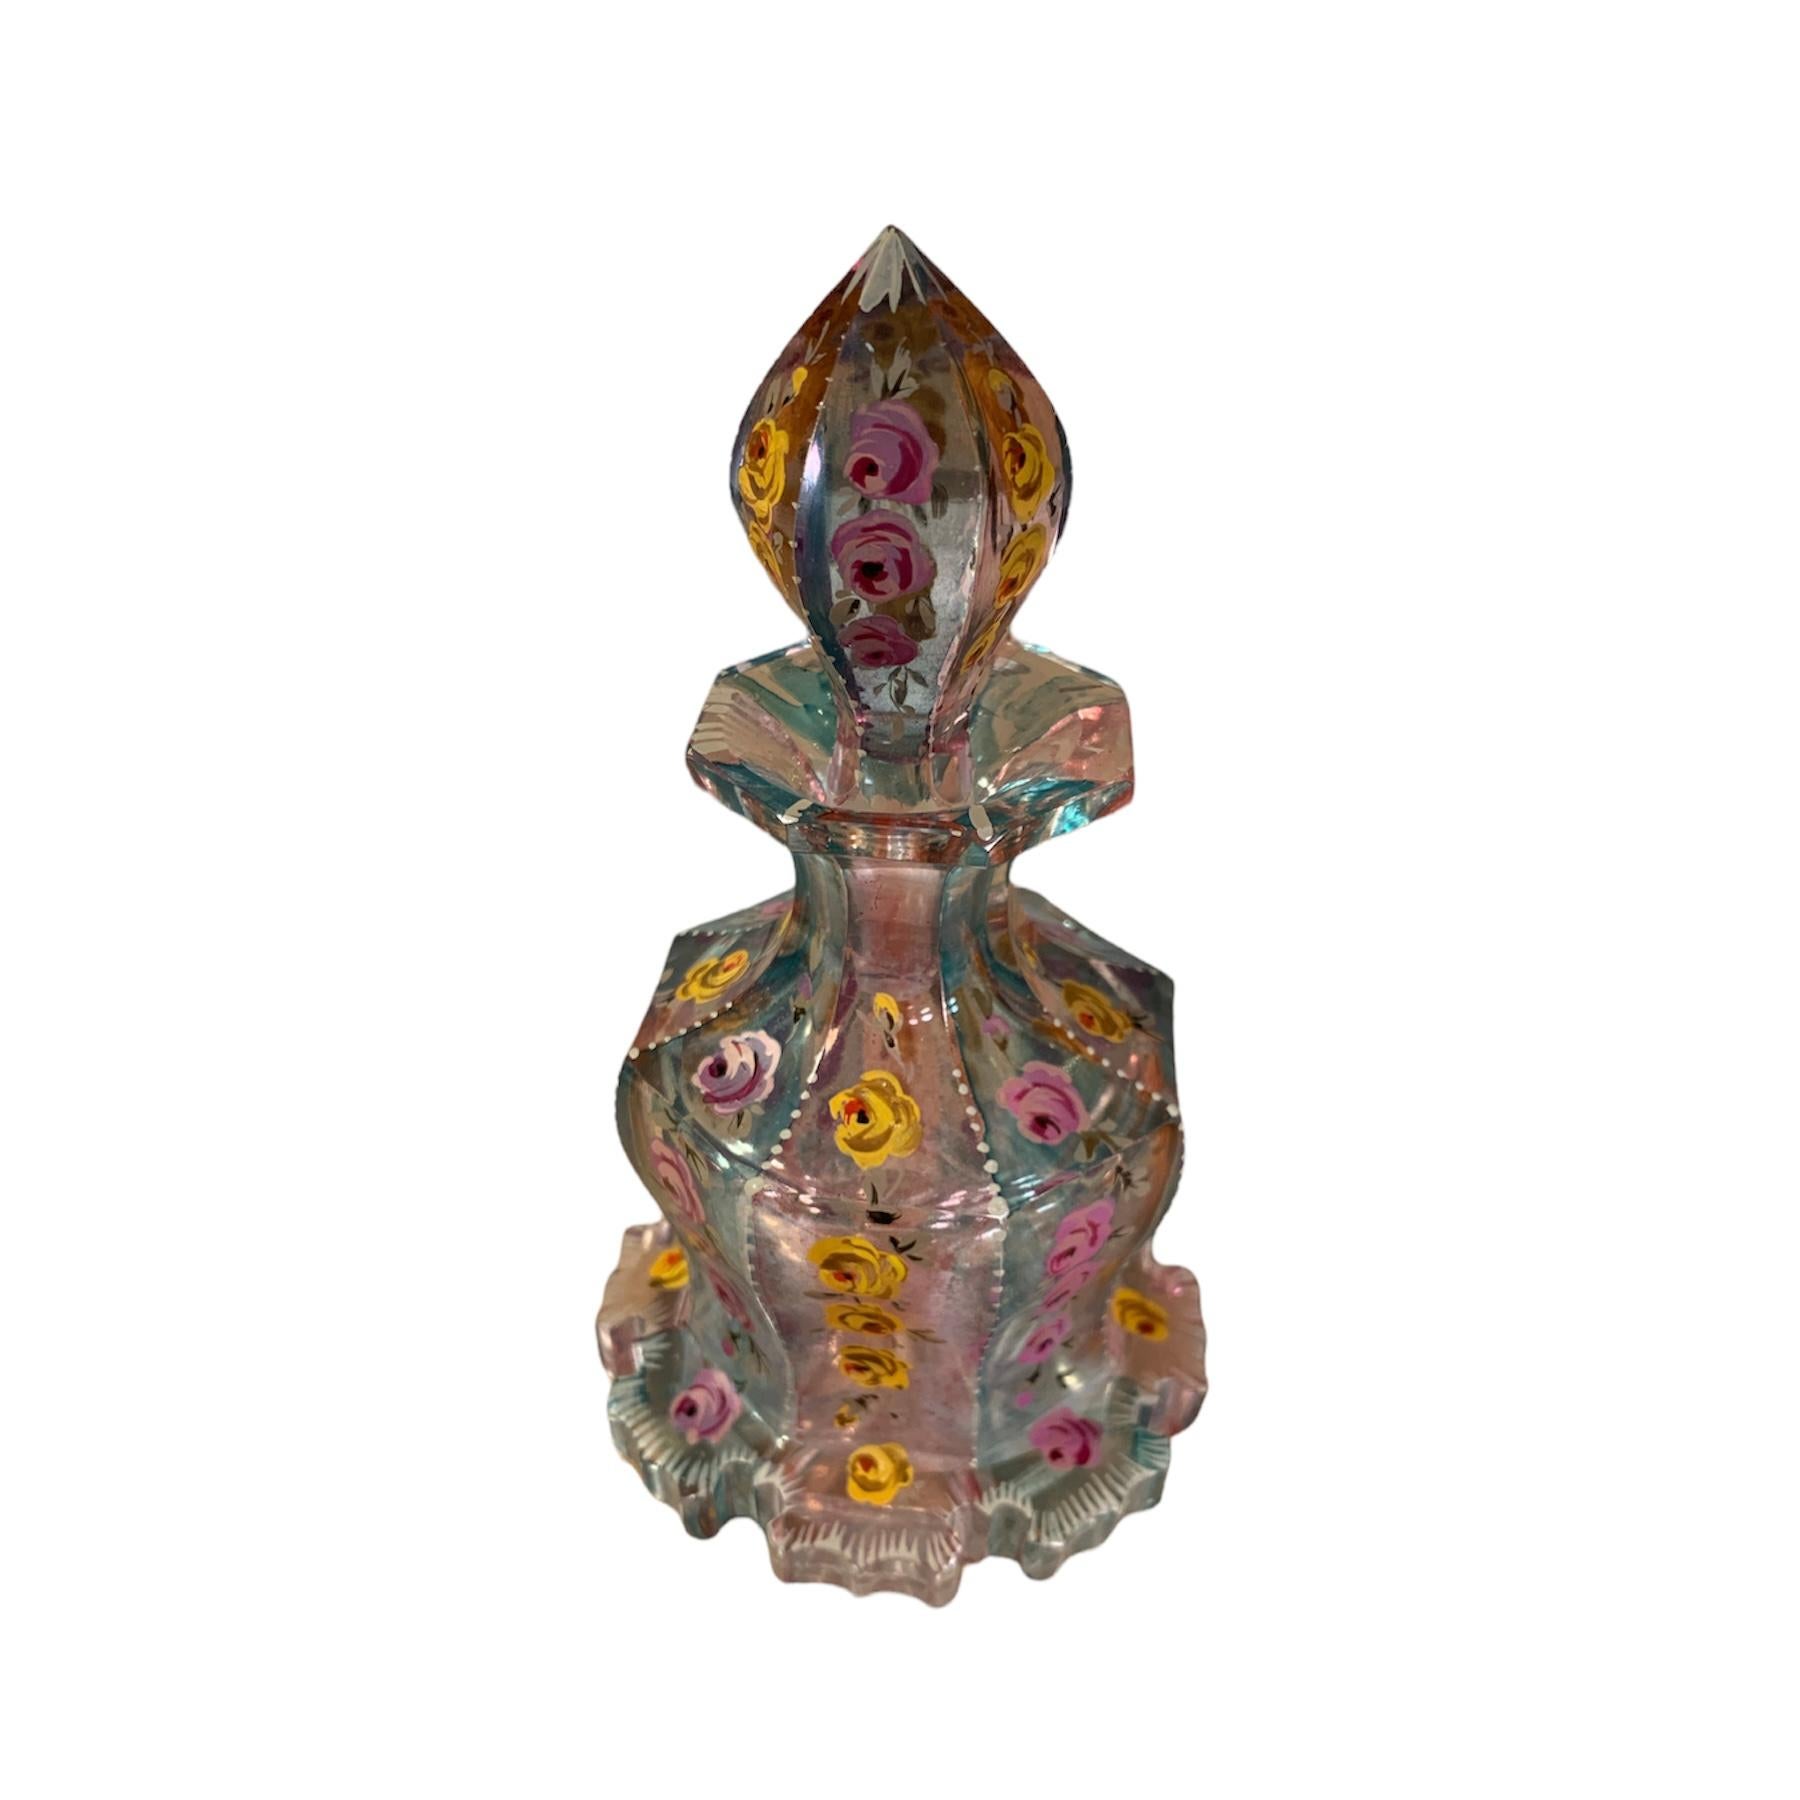 Bohemian glass, very unusual colors decorated with hand-painted all around and hand-cut in impressive shape, 2-colored crystal, the bidy is shaped in 8 side panels, each richly enameled with colorful flowers and leaves, further enamel-work on the